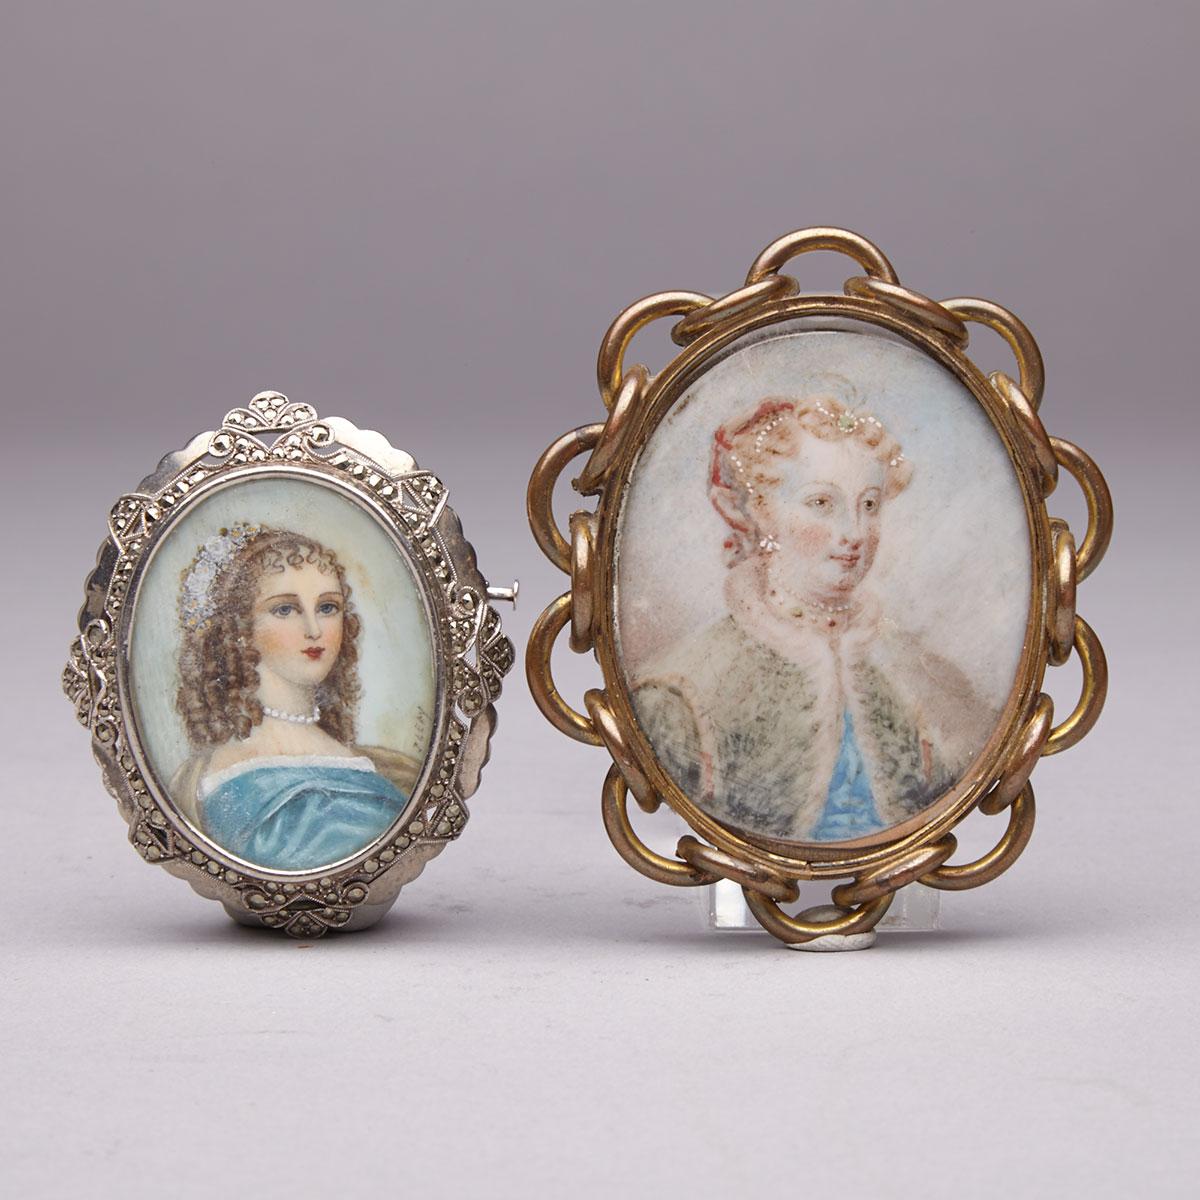 Two Portrait Miniature Brooches, 19th/early 20th century